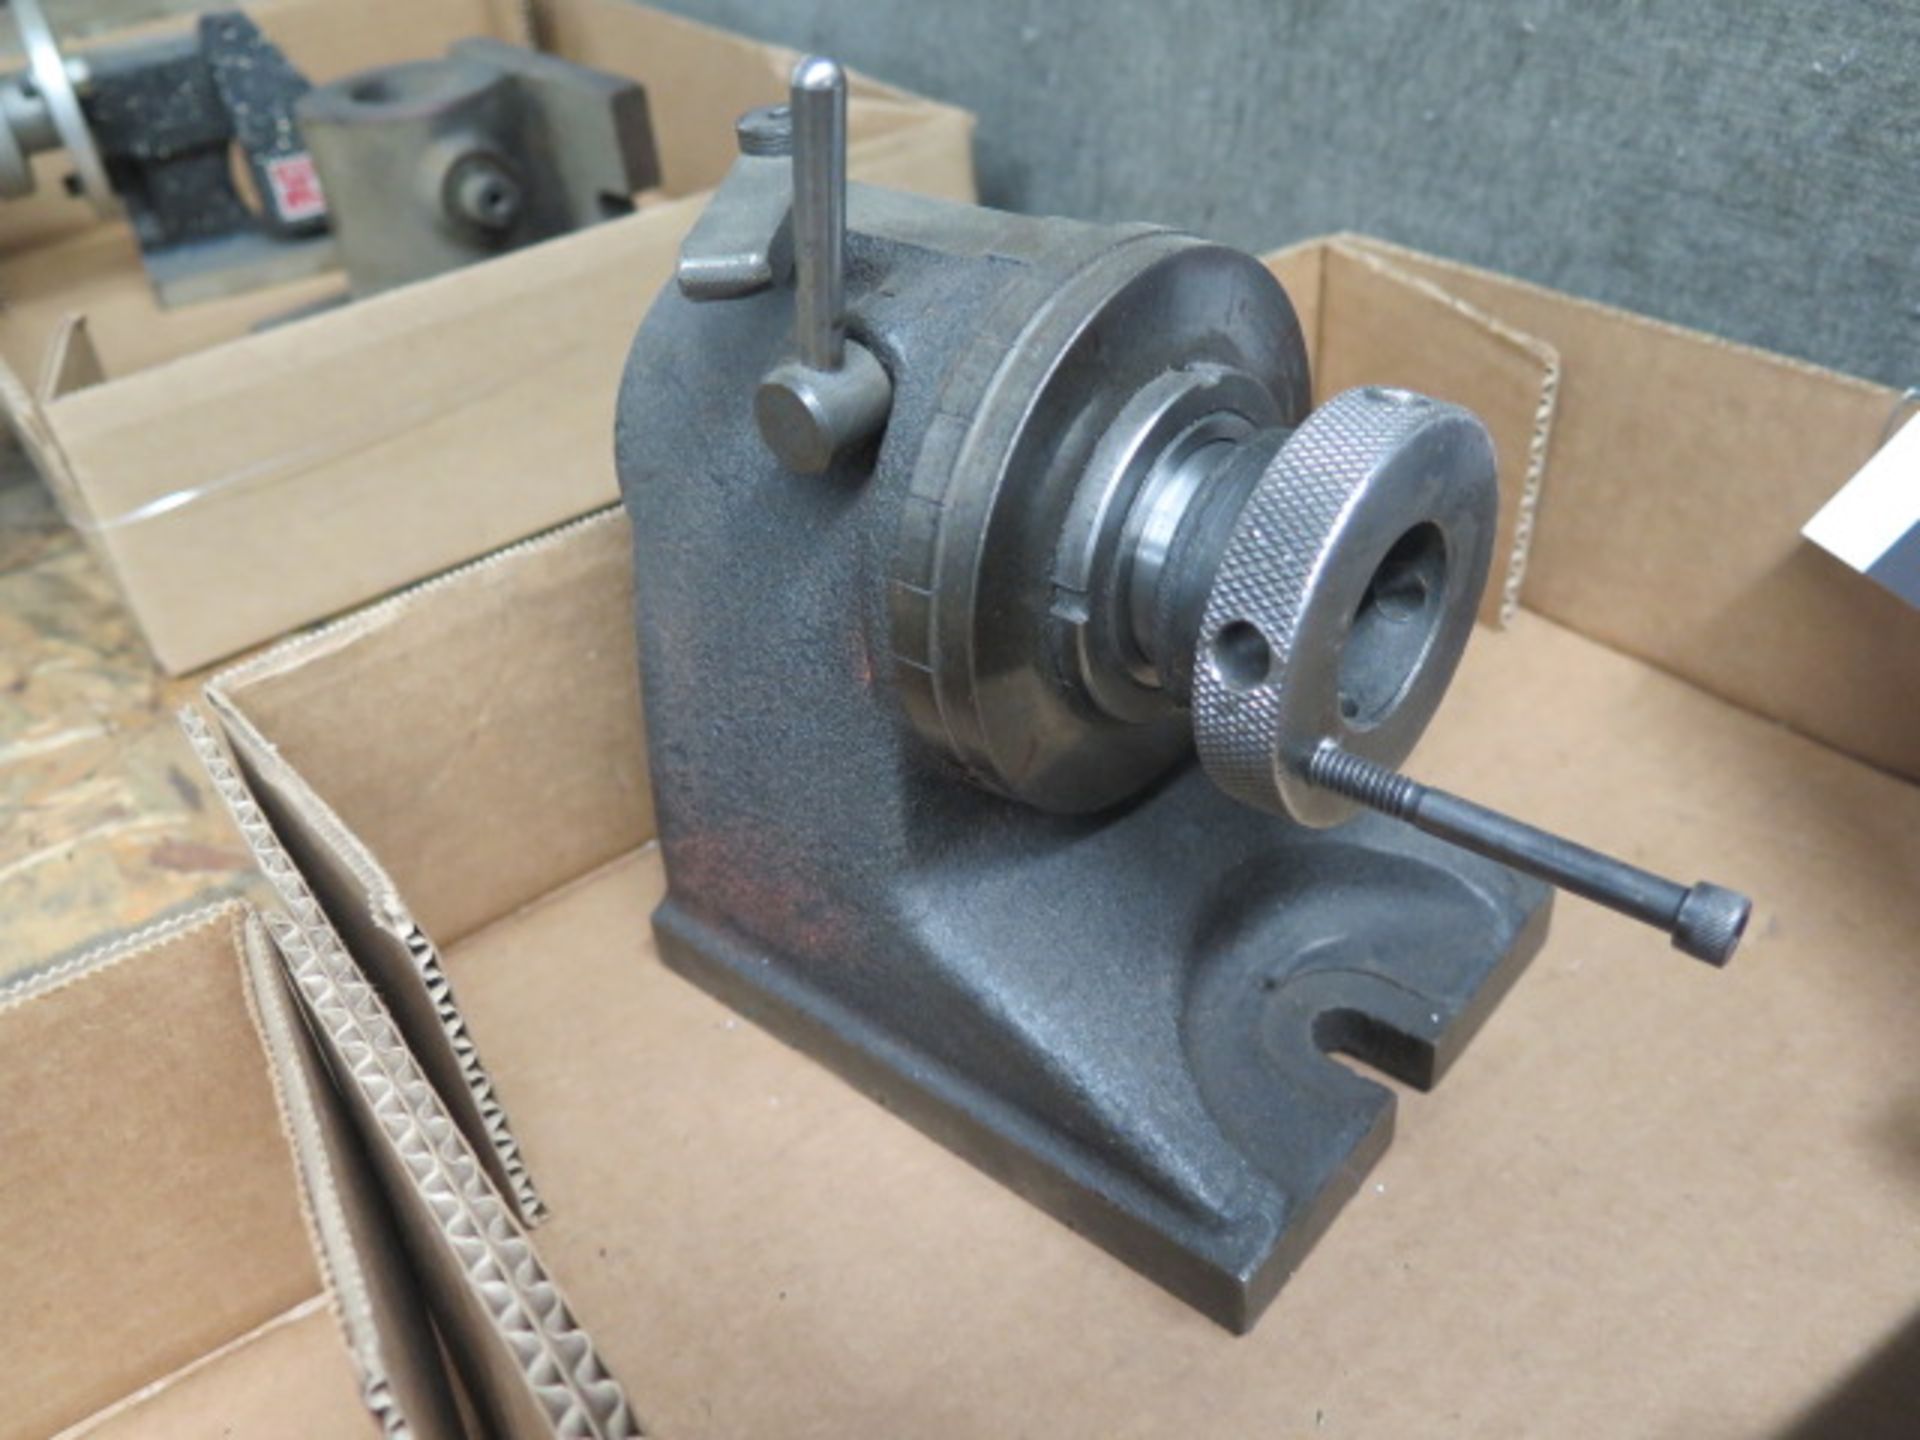 Hardinge 5C Indexing Head and Tailstock (SOLD AS-IS - NO WARRANTY) - Image 2 of 4